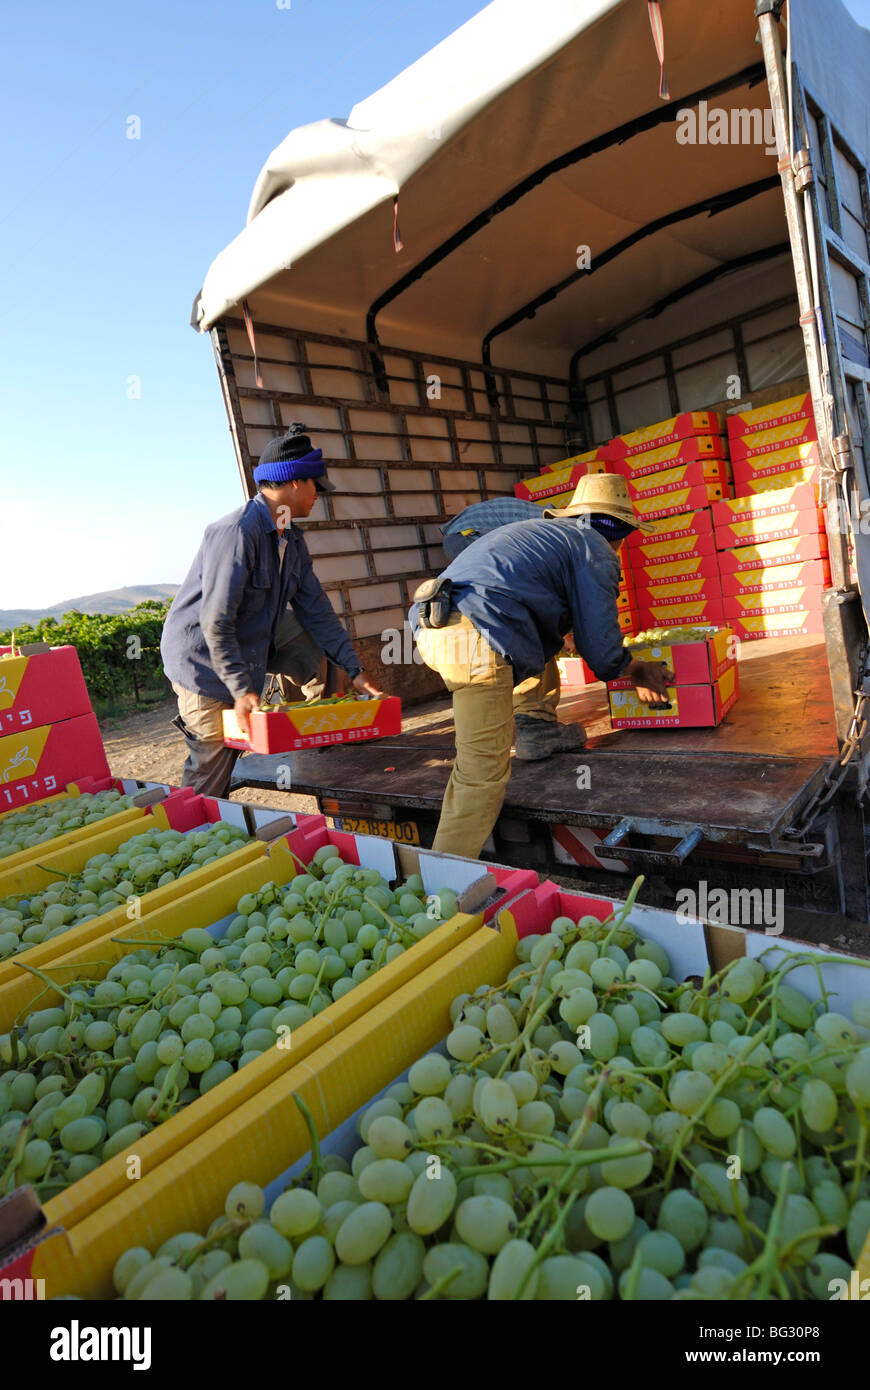 Israel, Negev, Lachish Region, Vineyard, Loading boxes of picked grapes for transportation to market Stock Photo